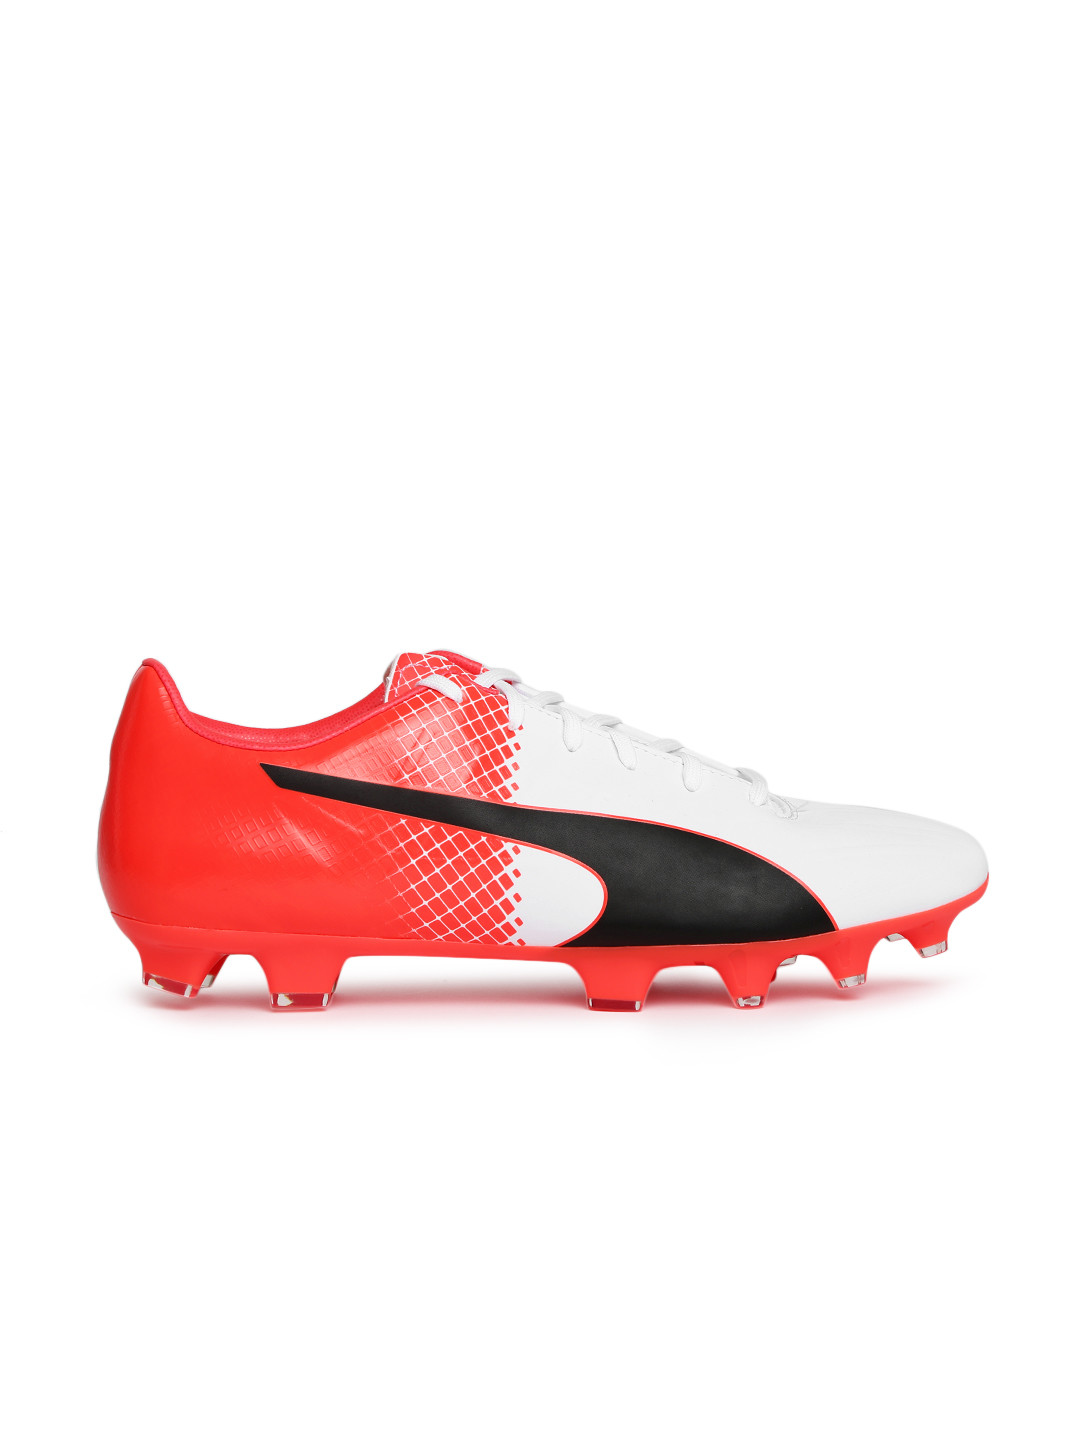 PUMA Men Black & White Printed Football Shoes At Just Rs 2599 Only - Myntra